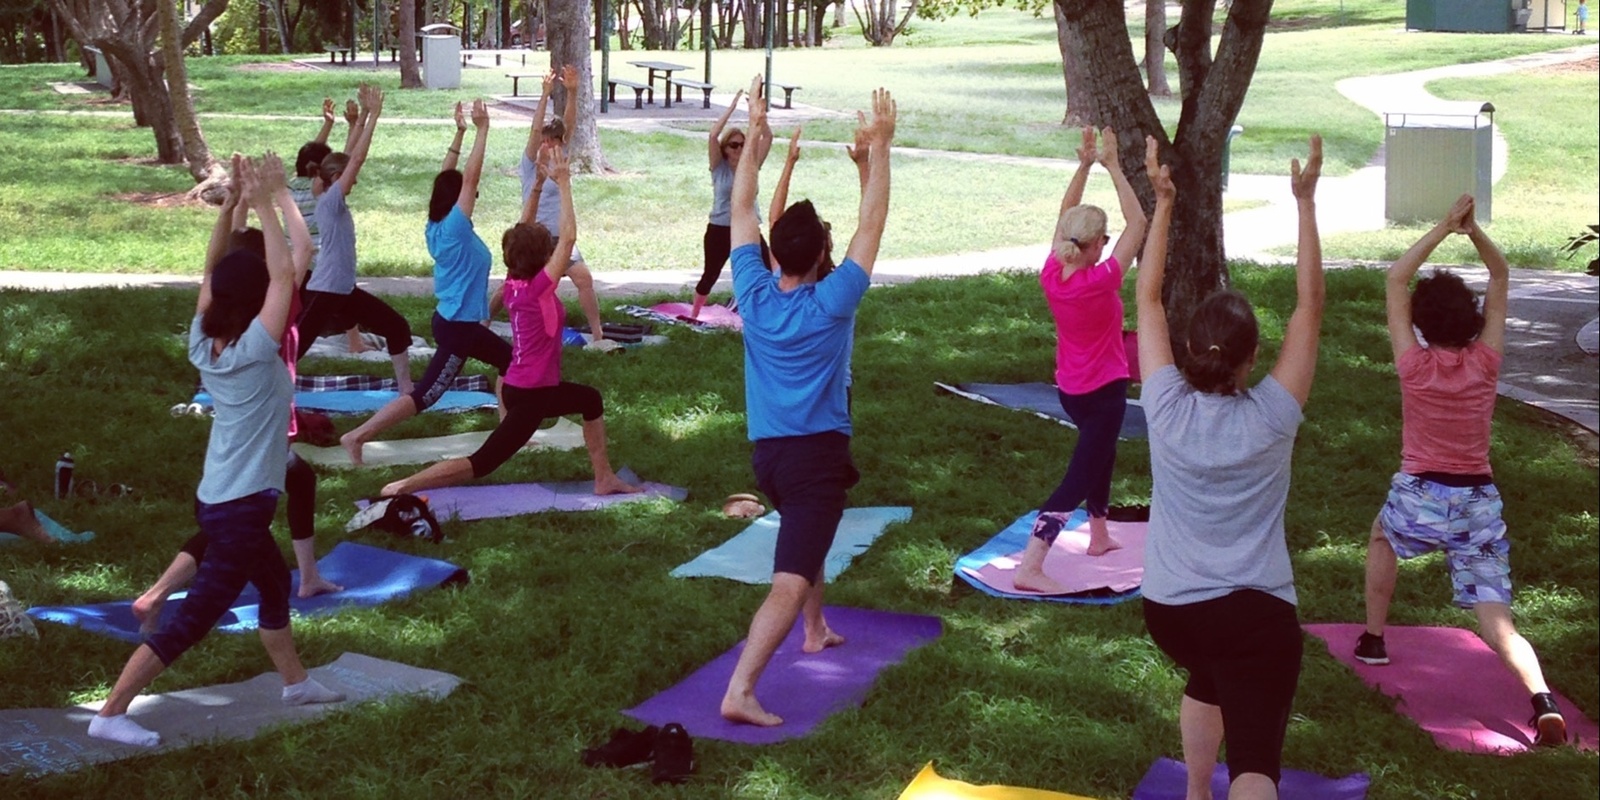 Banner image for Yoga in Perth St. Park. Camp Hill